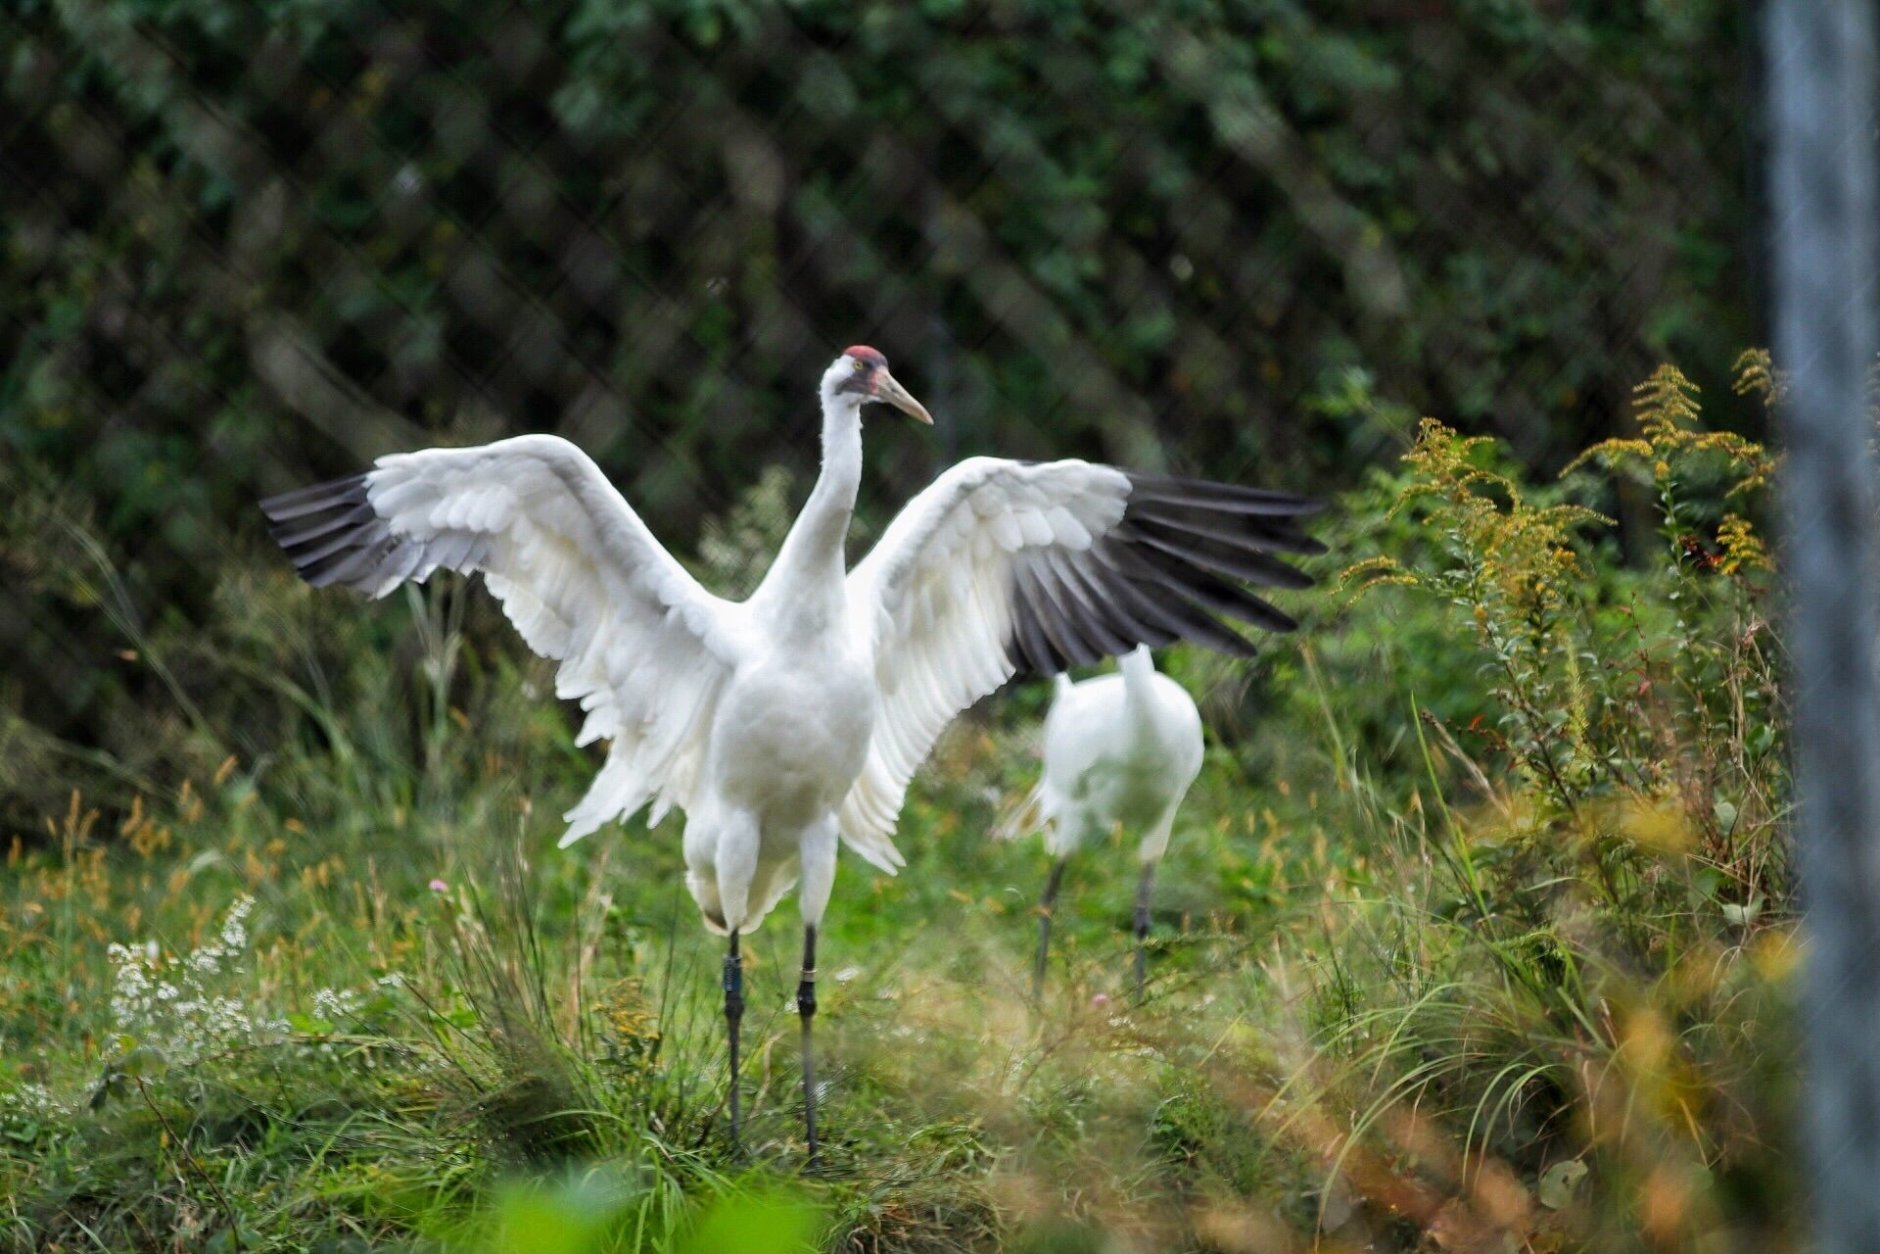 A male Whooping Crane stretches those broad wings. His mate is partially visible behind him. Whooping Cranes mate for life. (WTOP/Kate Ryan)